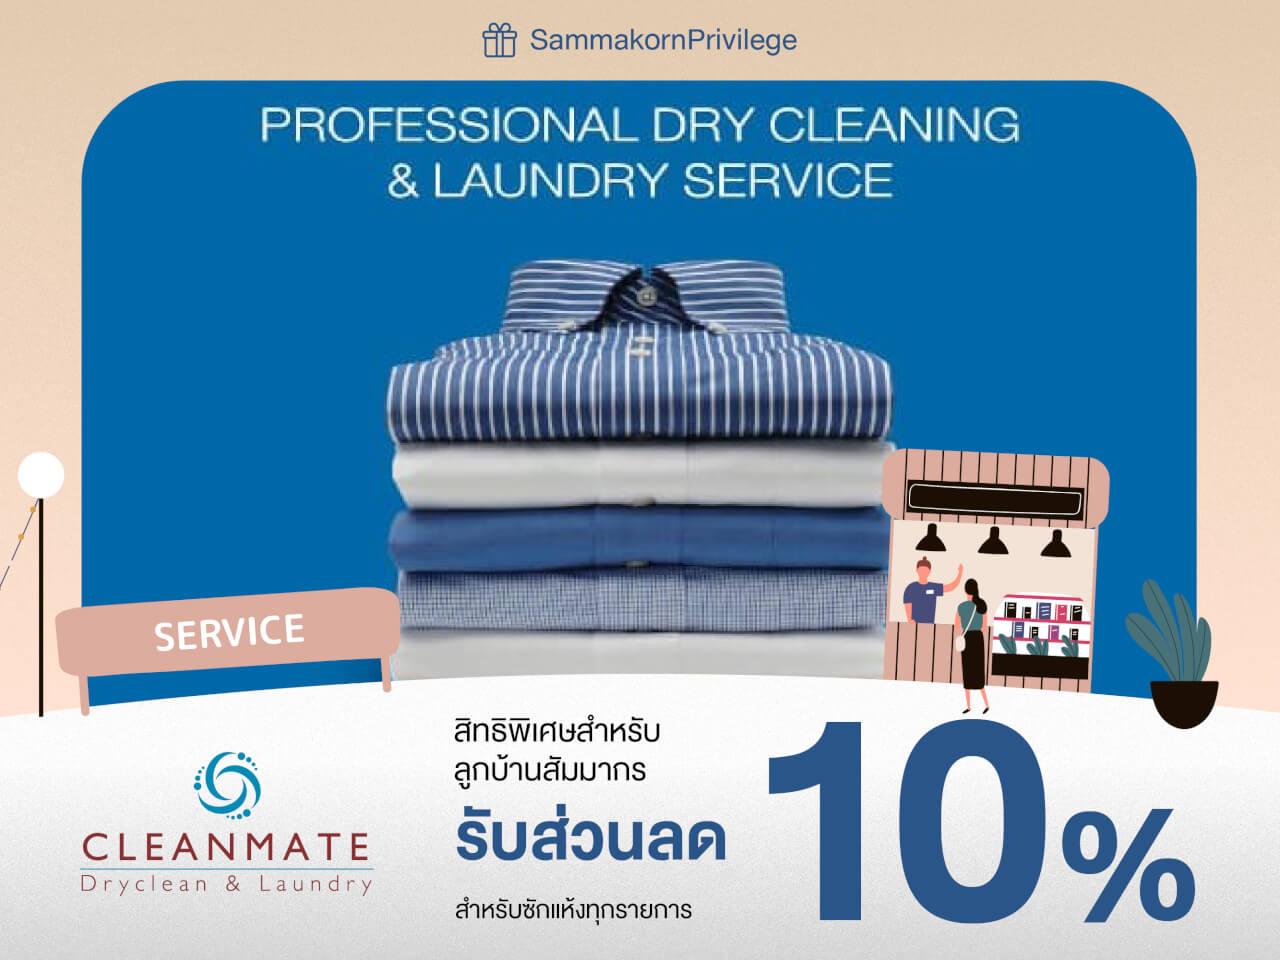 CleanMate DryClean And Laundry